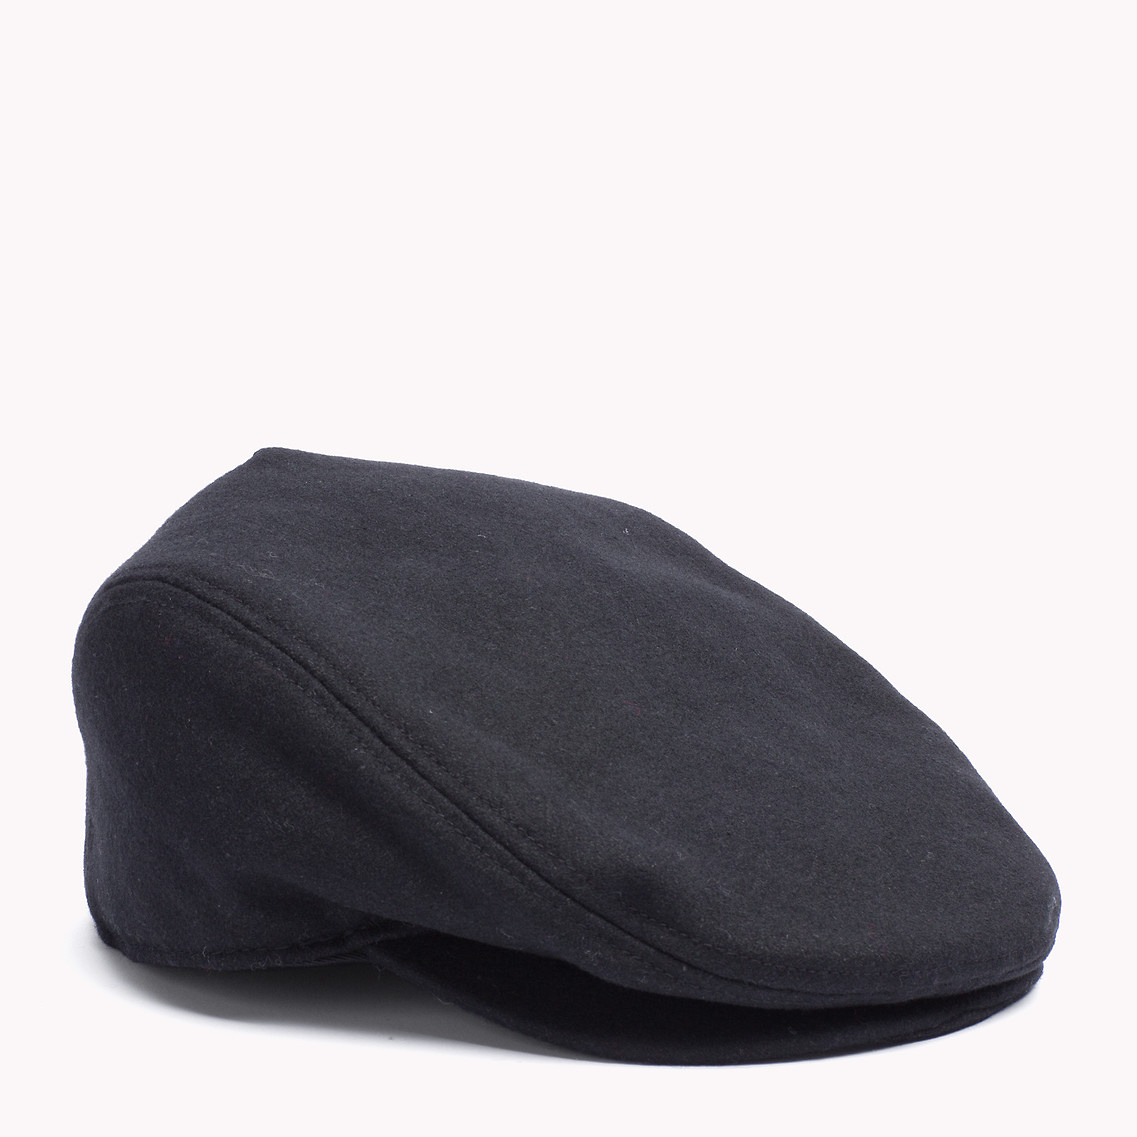 Flat Cap Tommy Hilfiger Hotsell, SAVE 55%.